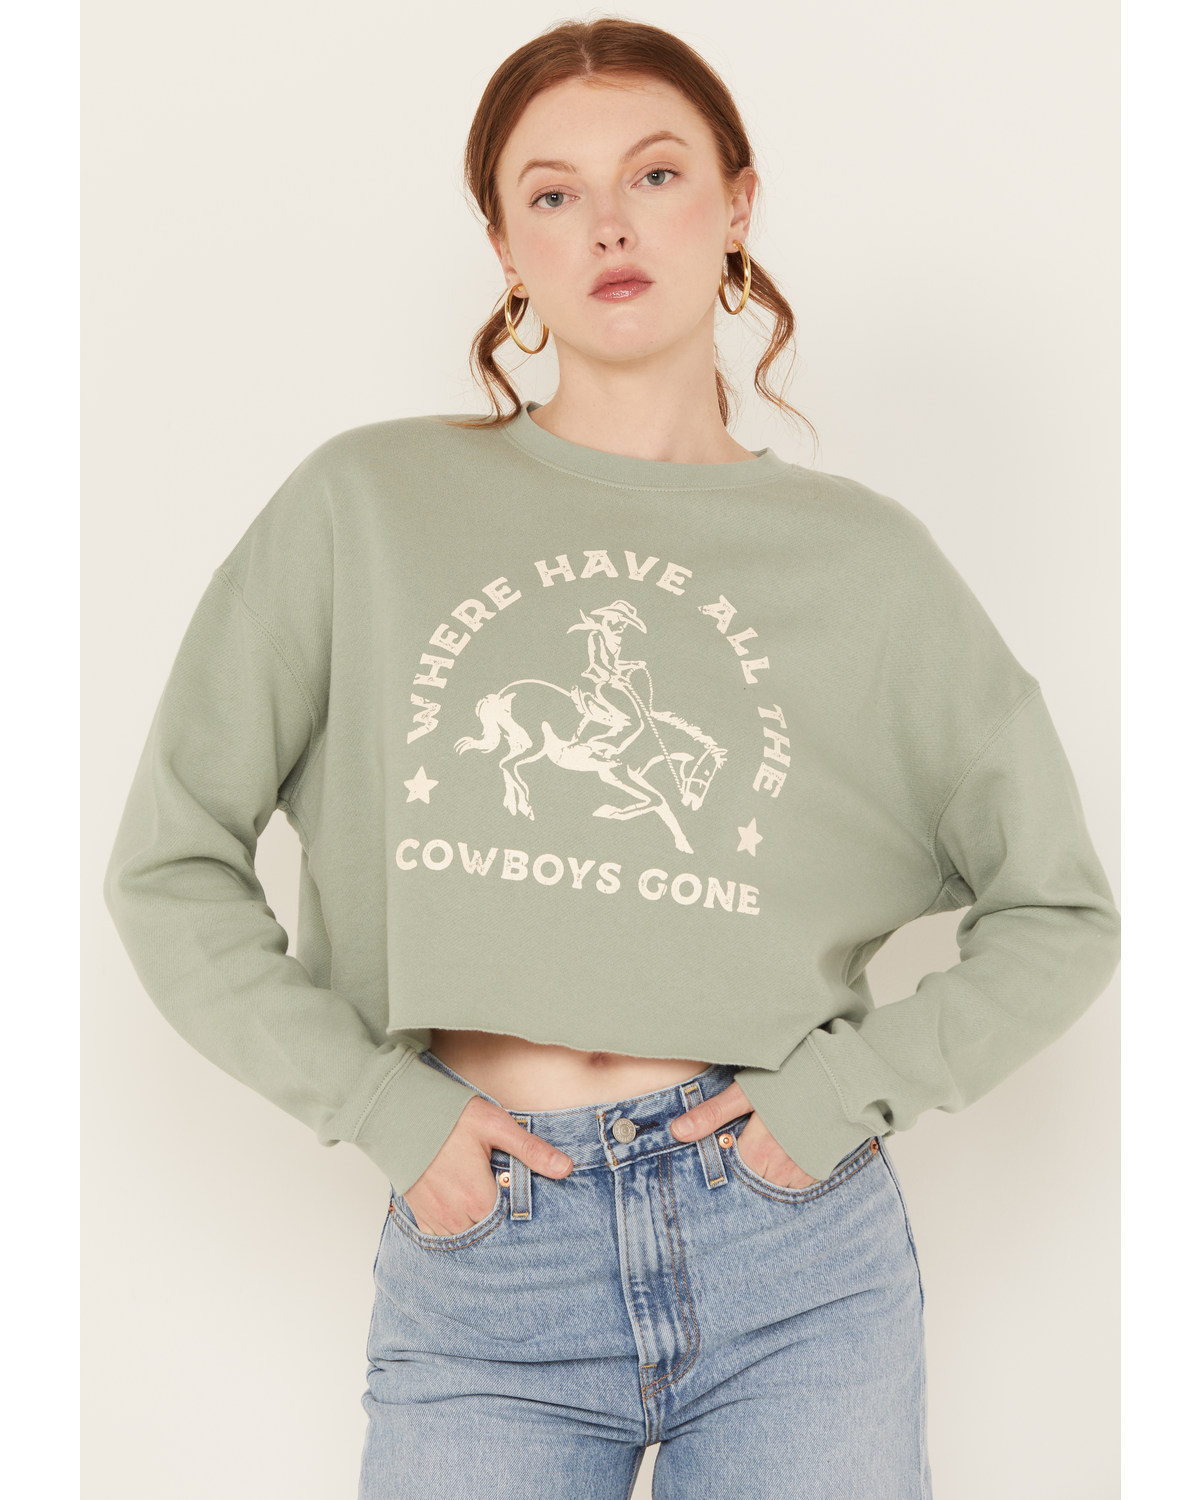 Ali Dee Women's Where Have All The Cowboys Gone Graphic Crewneck